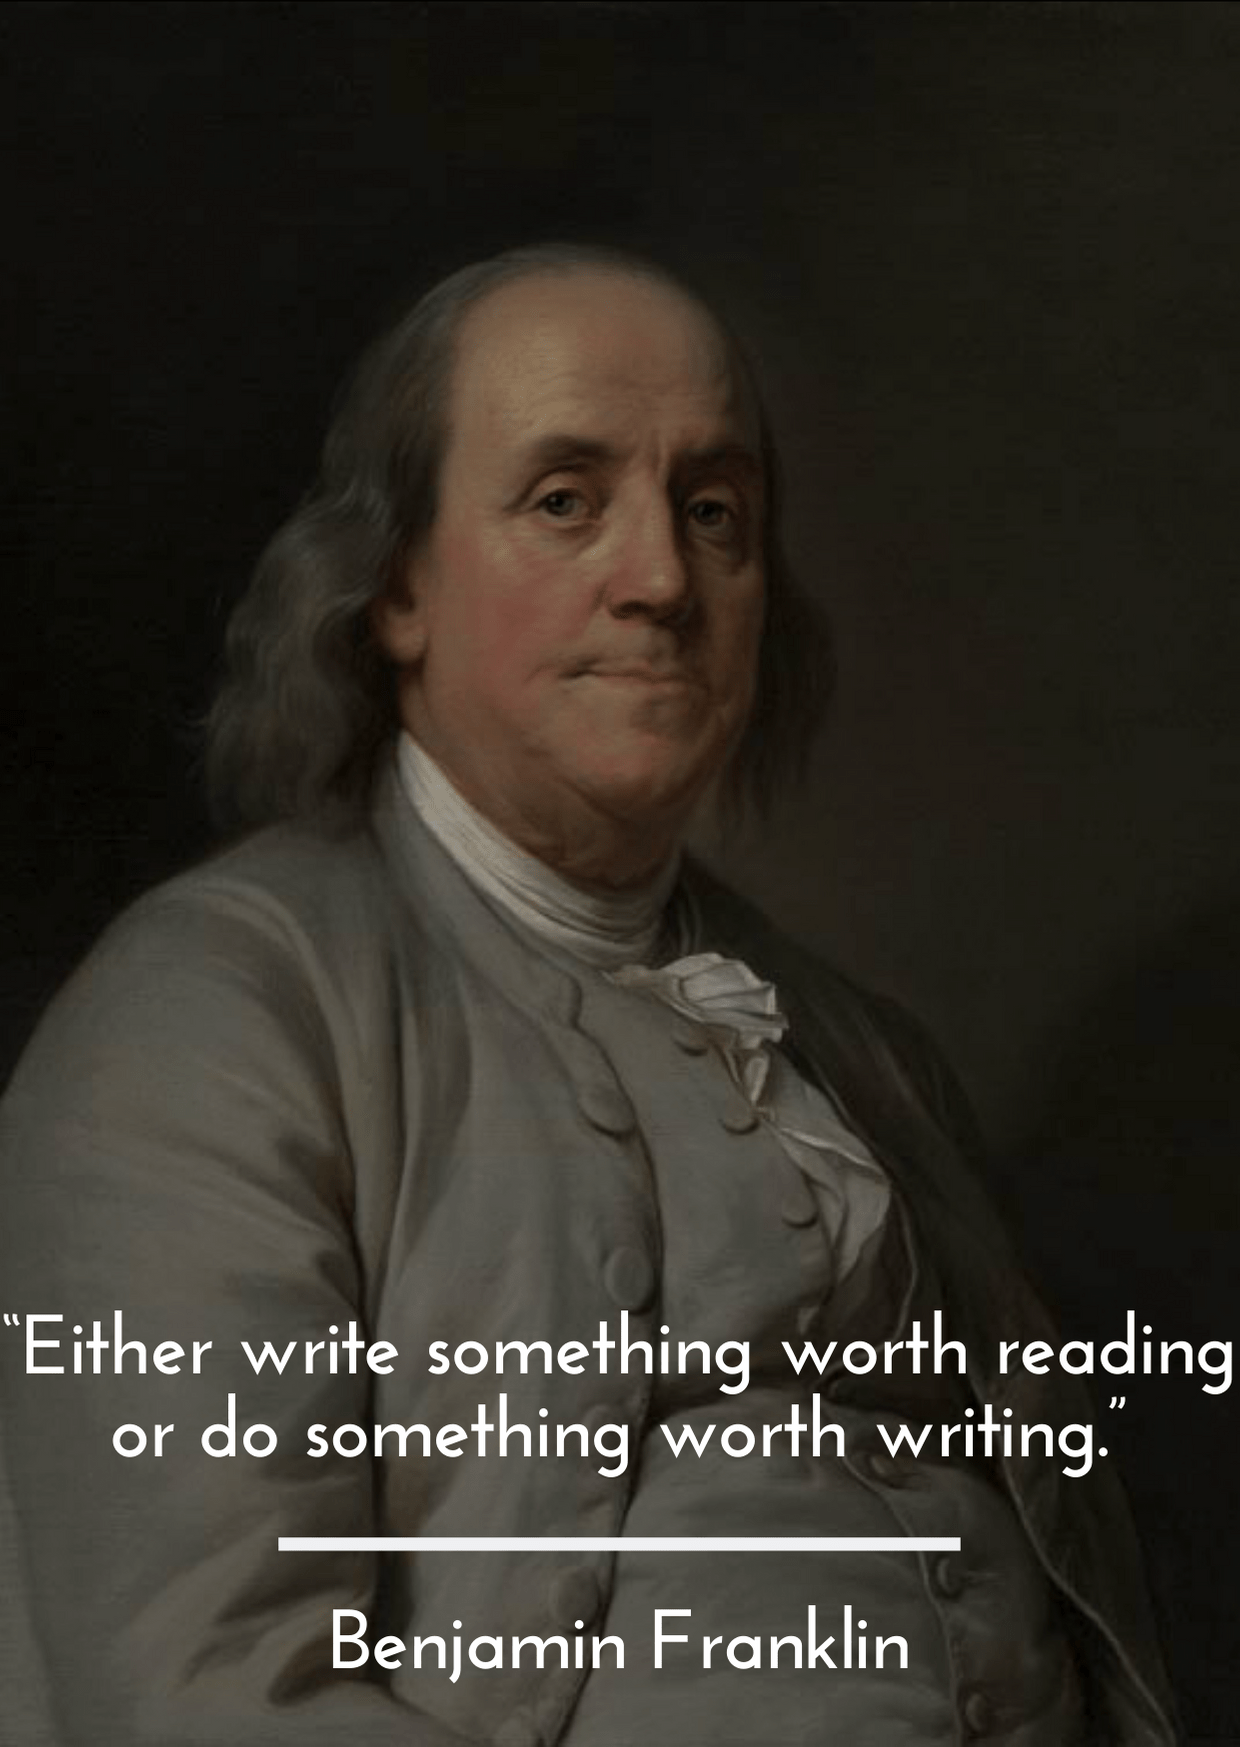 public relations quote by benjamin franklin